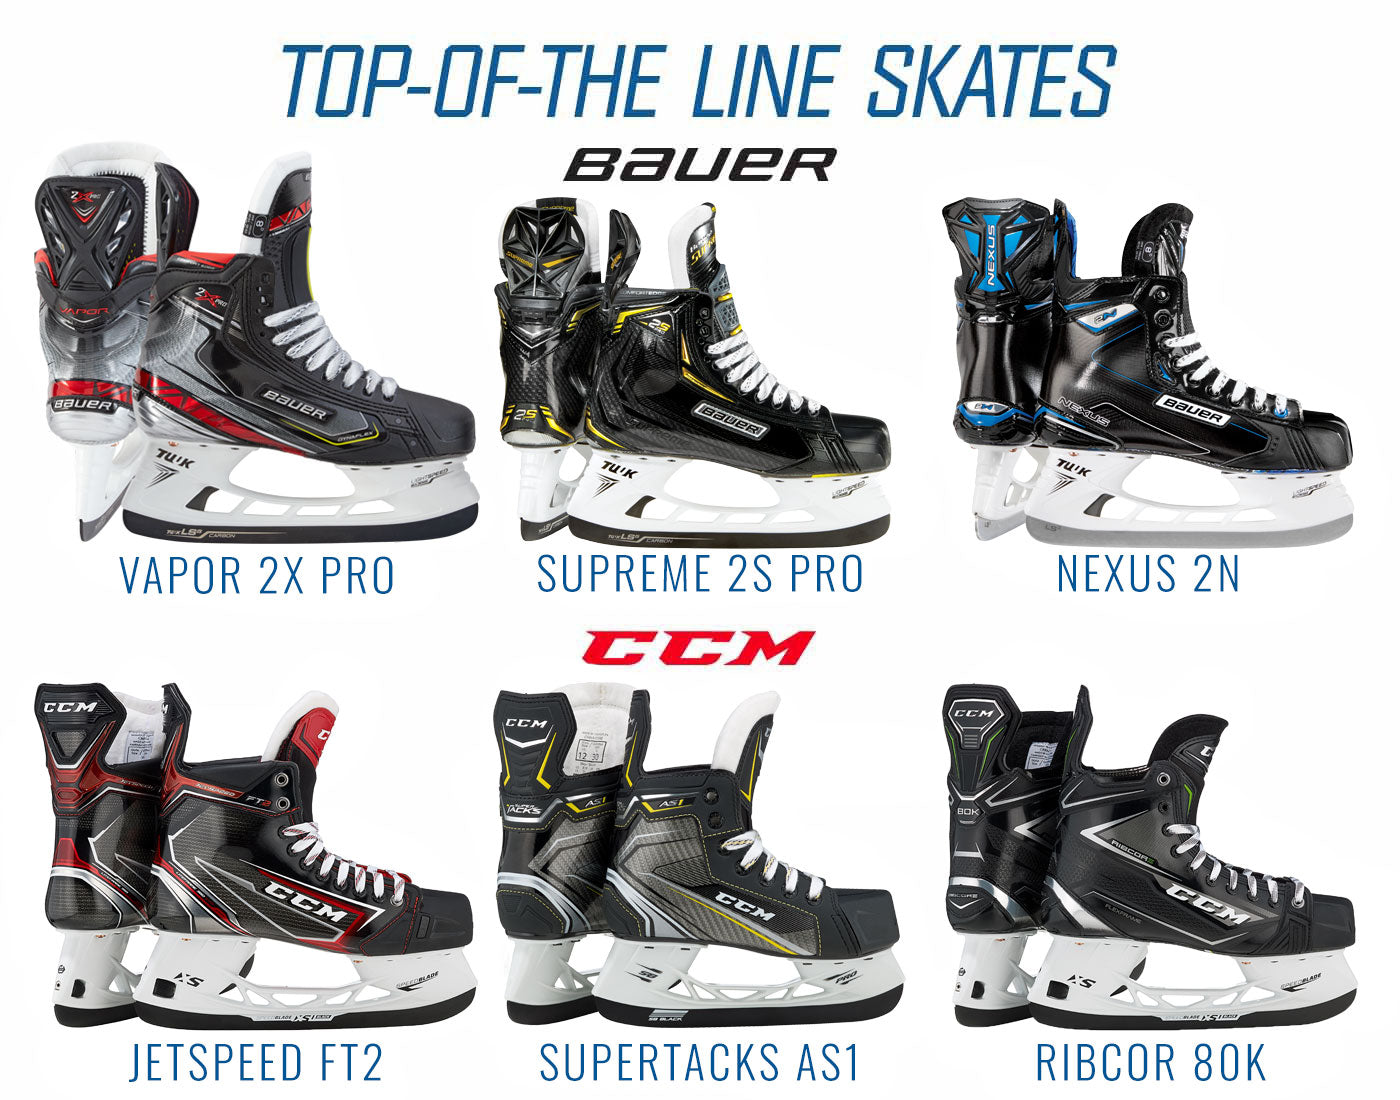 Top-Of-The-Line Skates